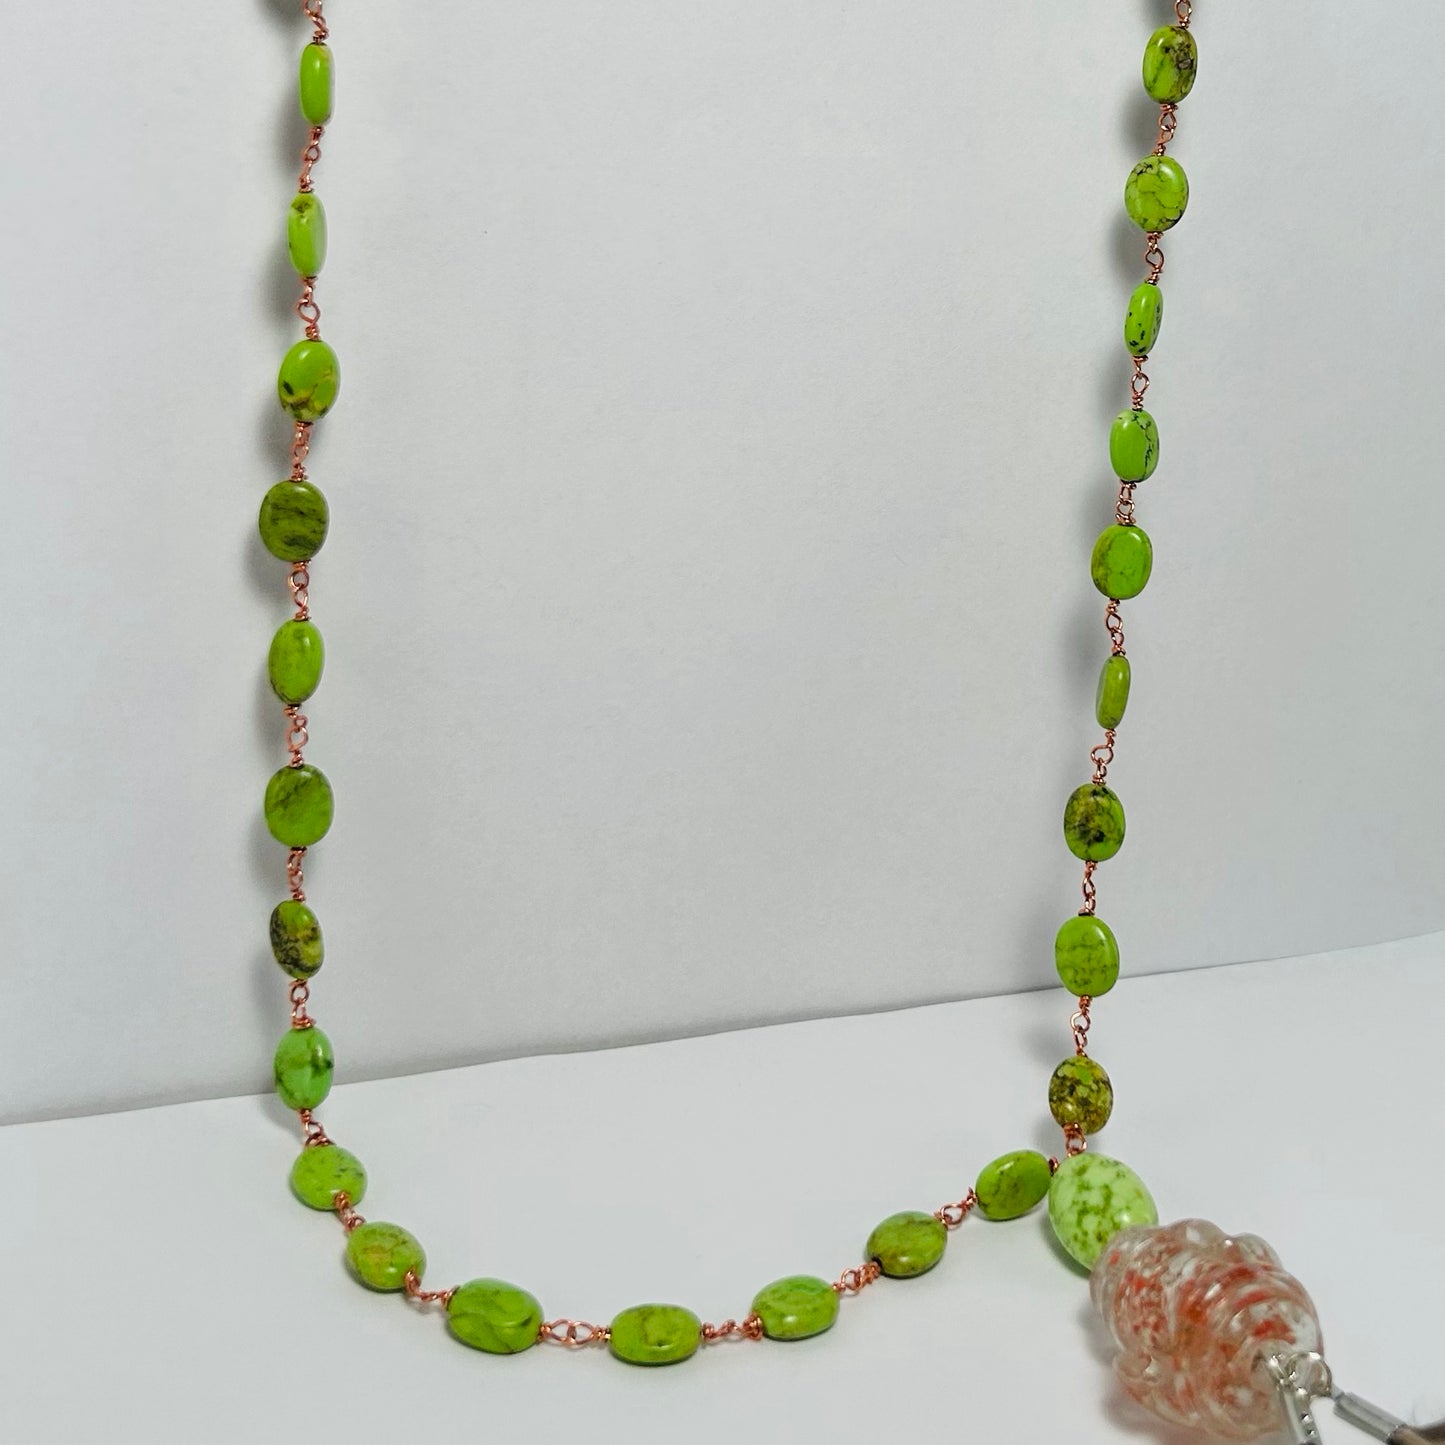 Nymph Swag, Beaded Chain Pendant Necklace